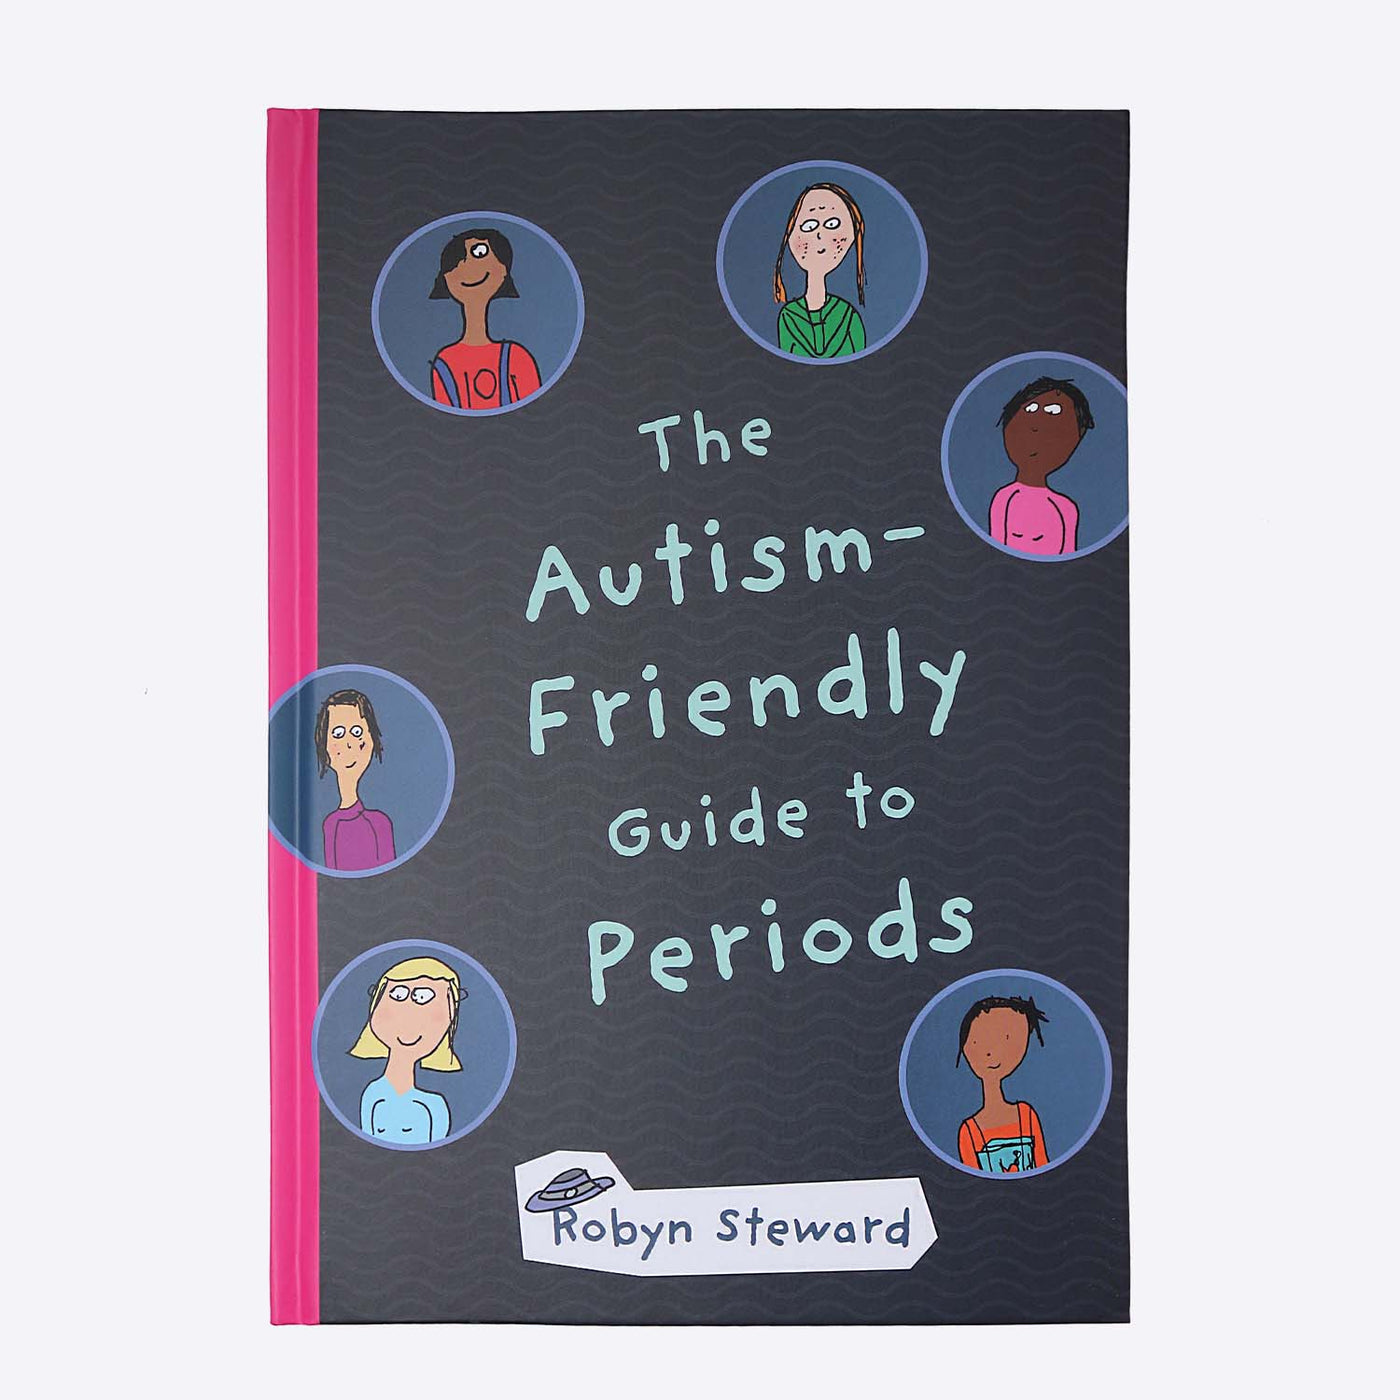 WUKA The Autism-Friendly Guide to Periods by Robyn Steward